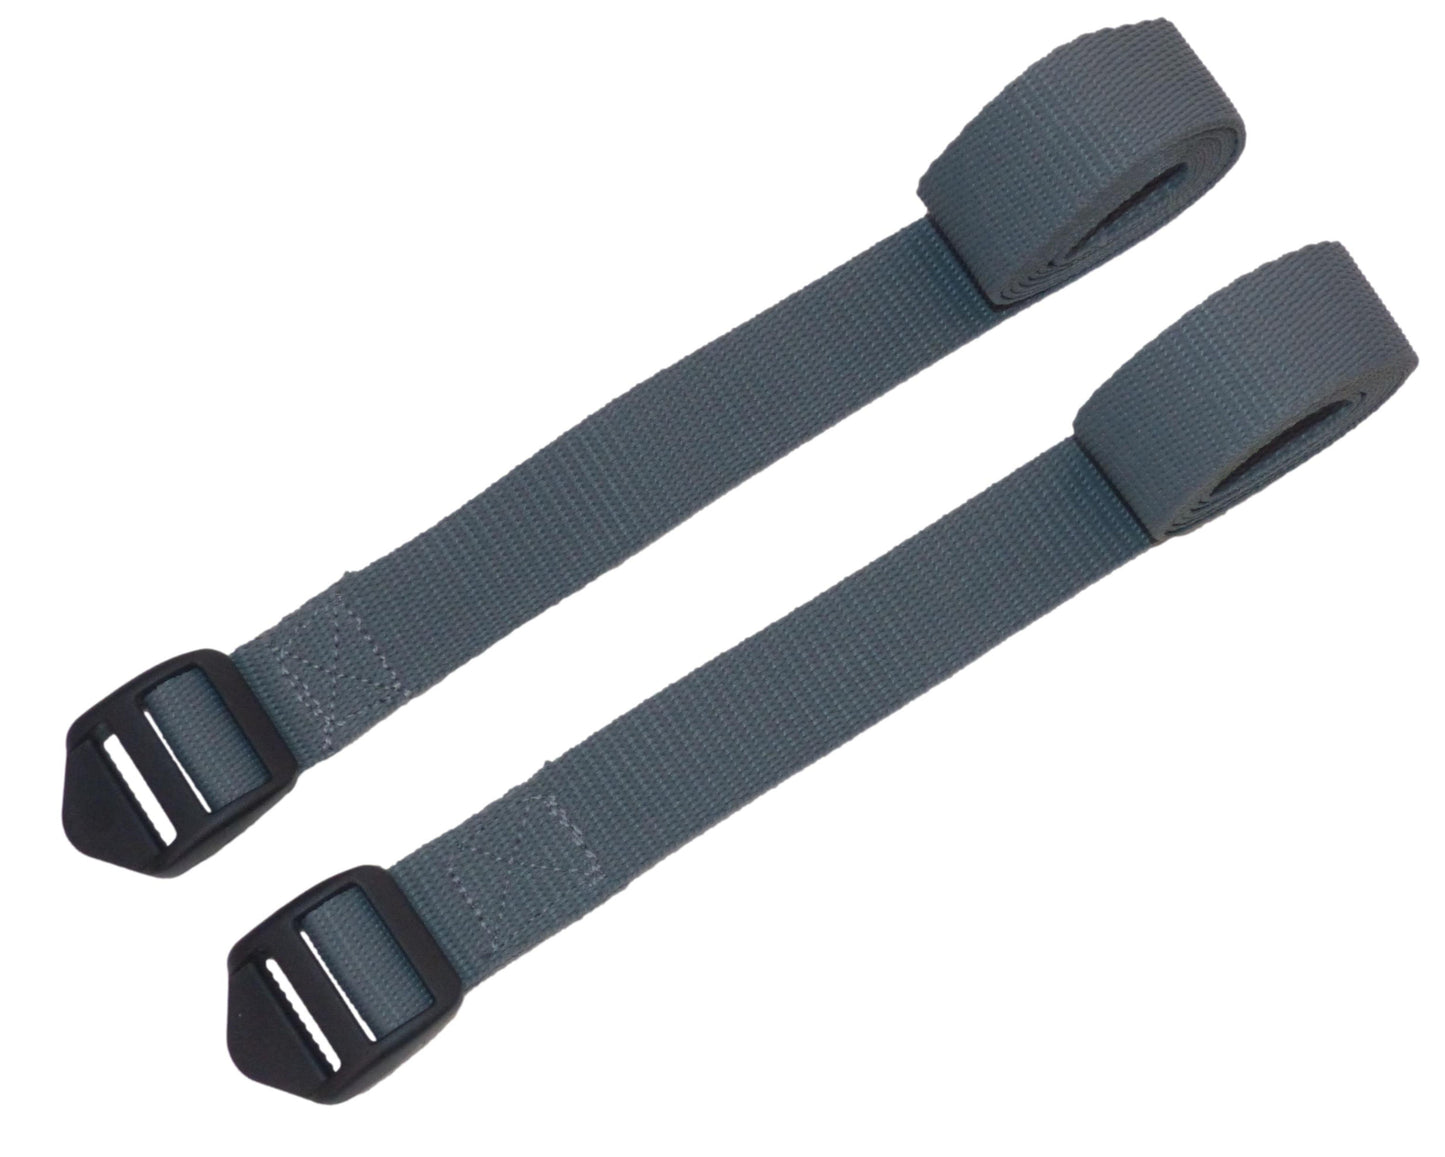 The Benristraps 25mm Camping Straps, 150cm (pair) in grey